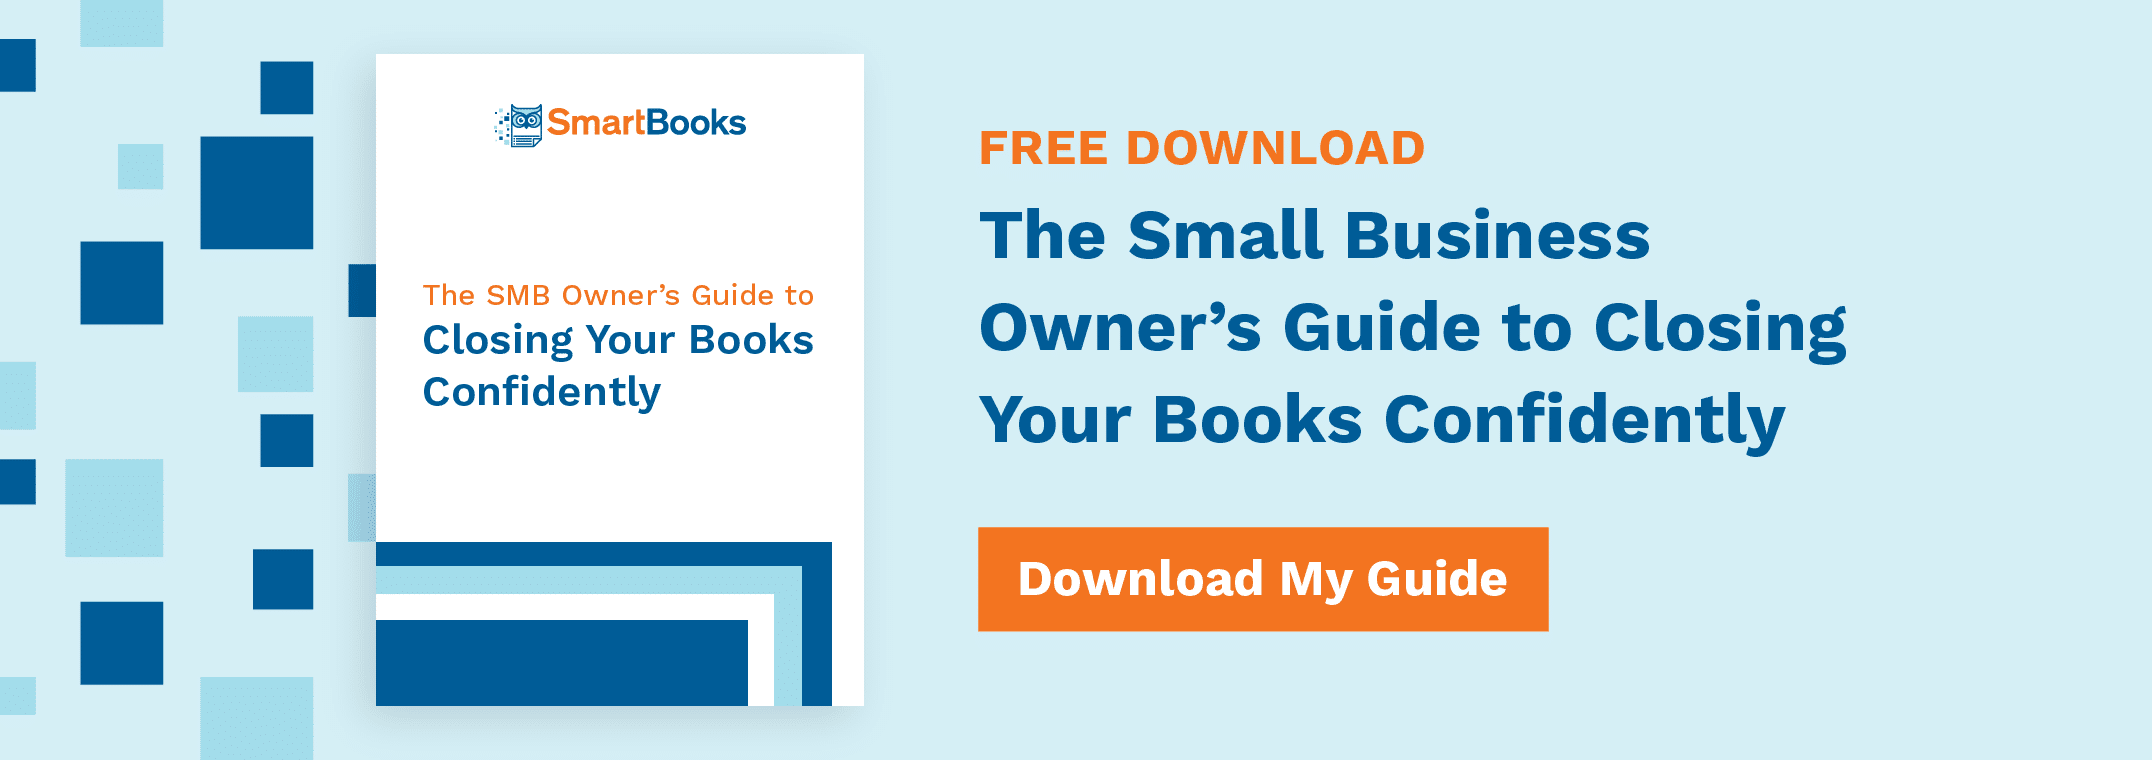 The Small Business Owner's Guide to Closing Your Books Confidently